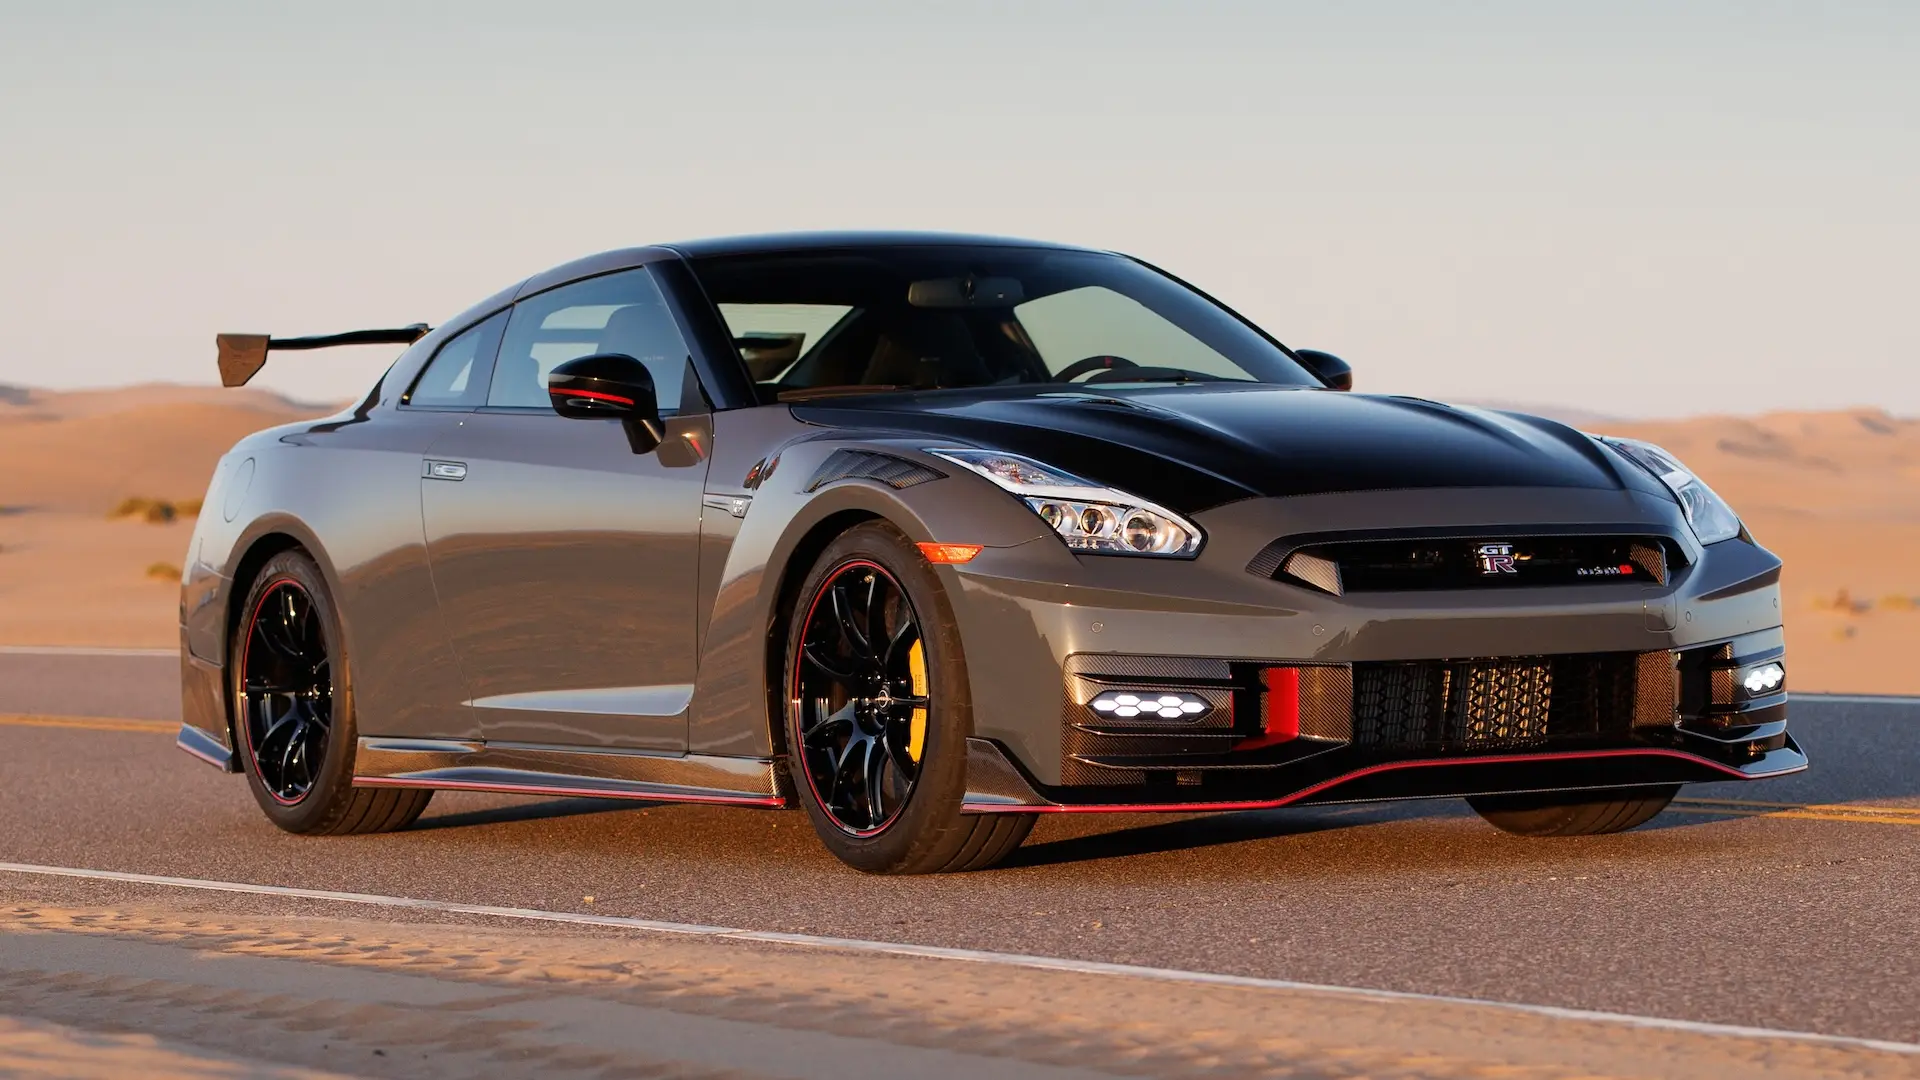 During the quarter, Nissan only sold one GT-R every day